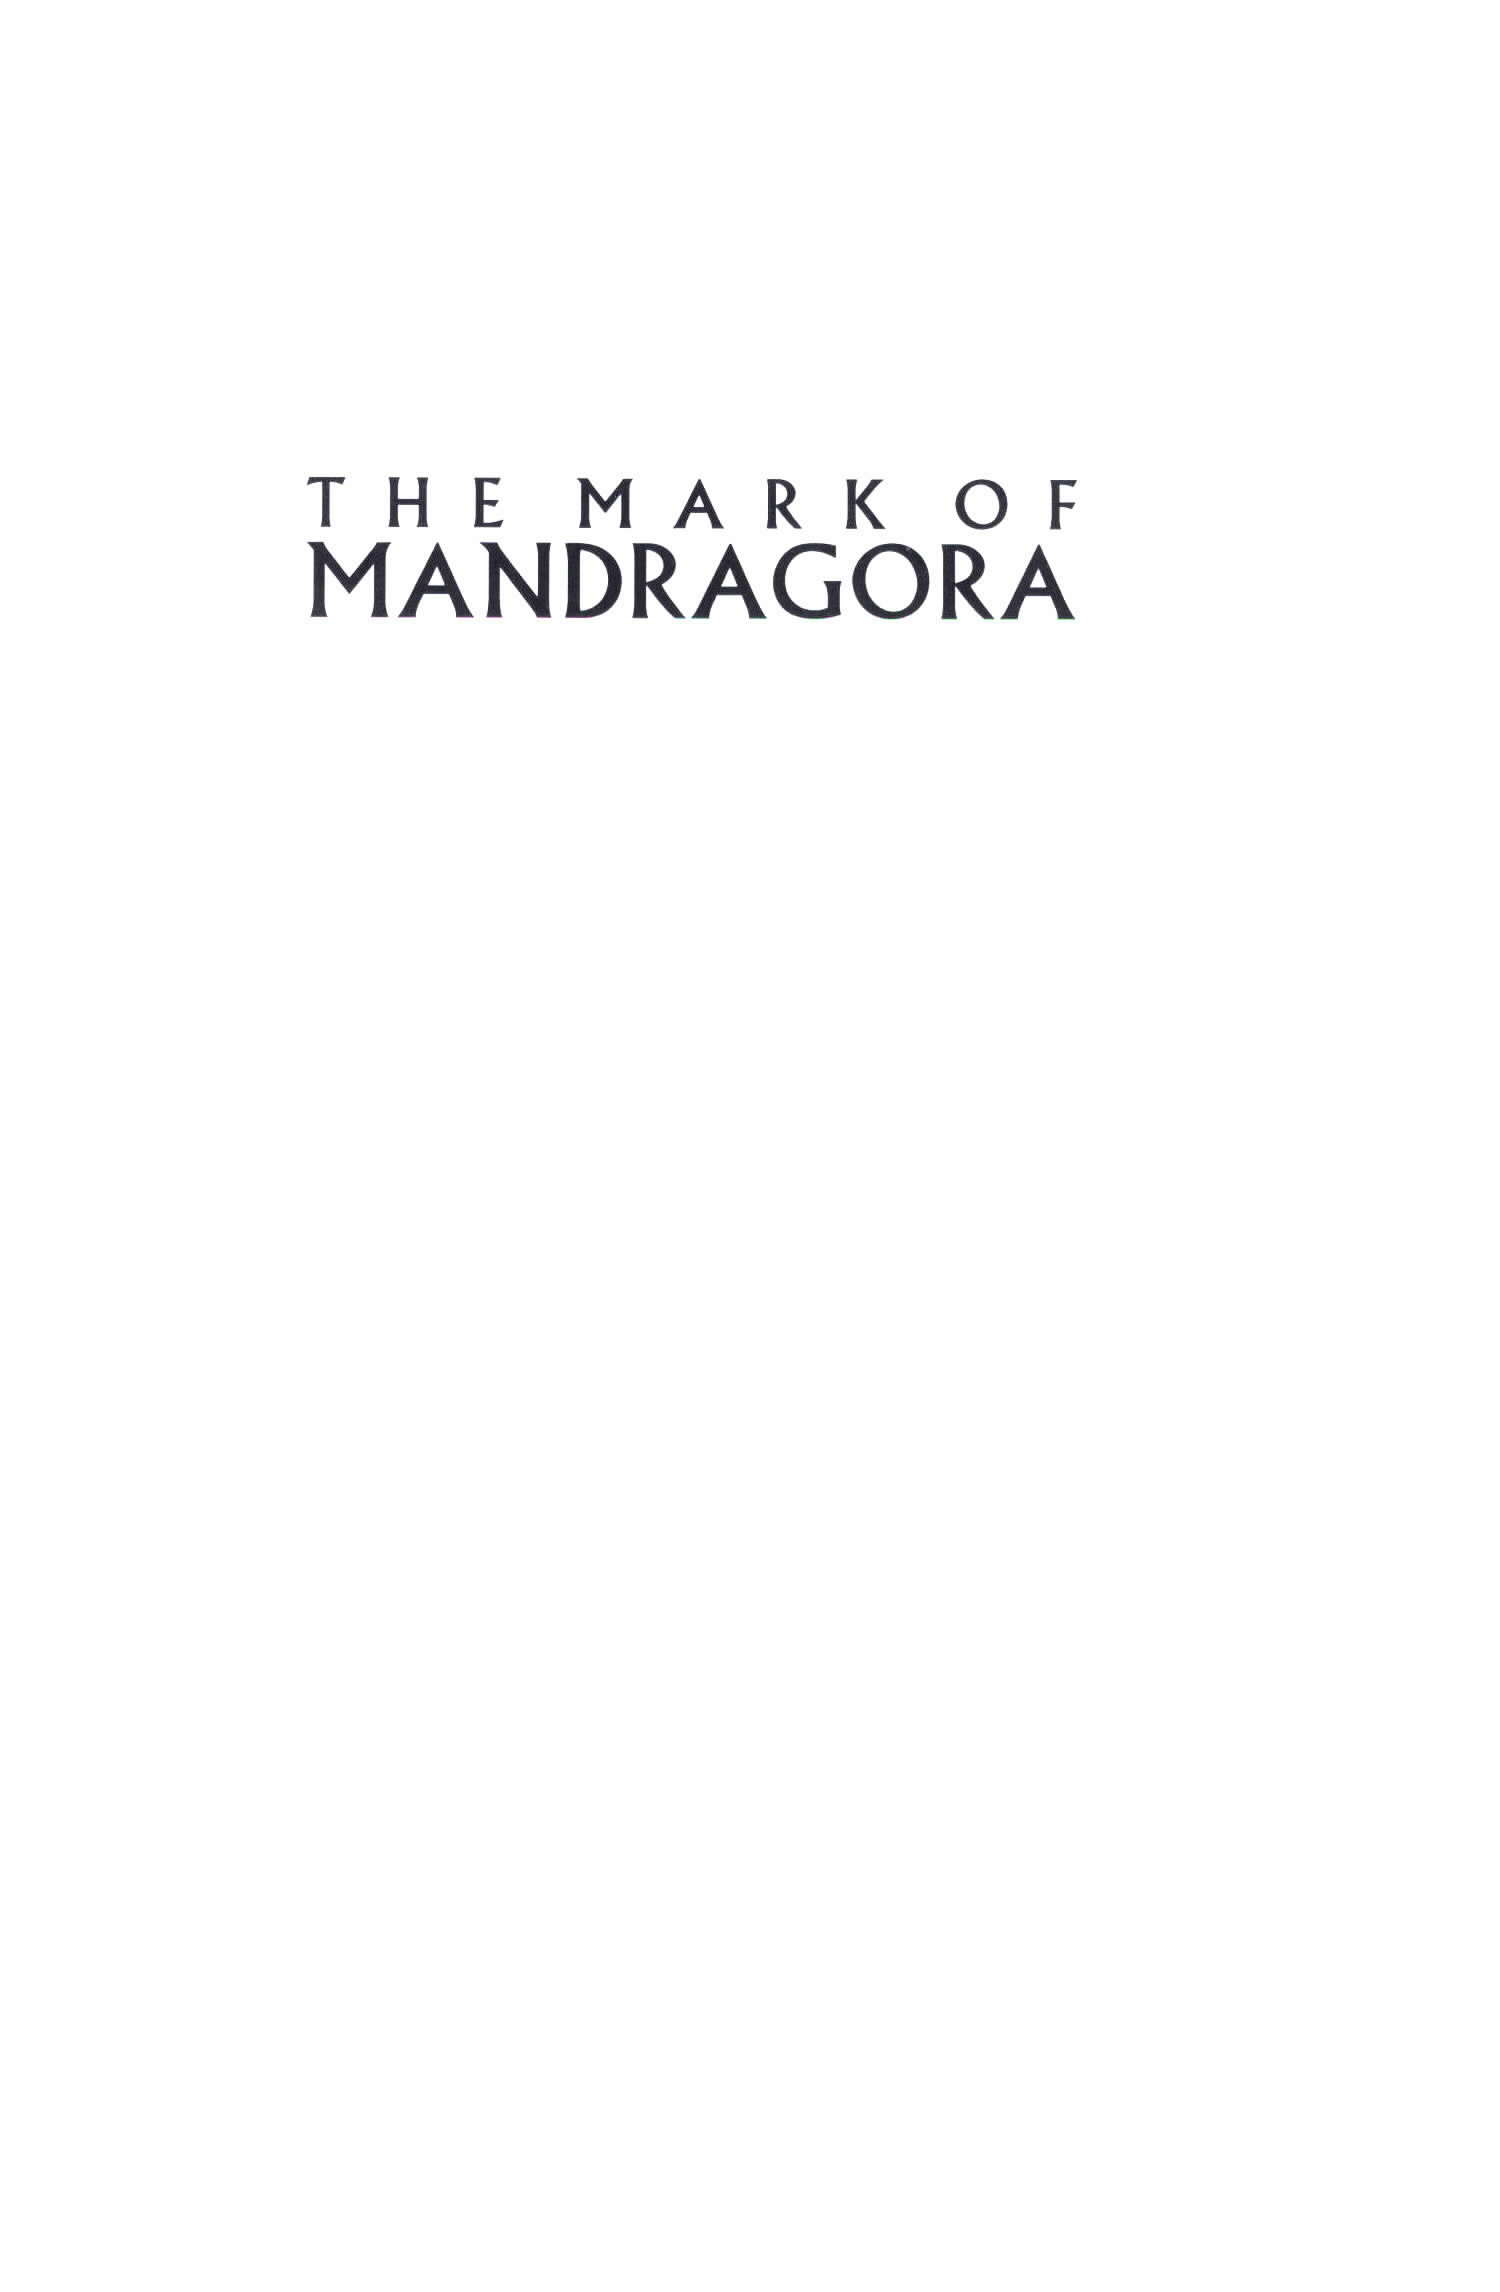 Read online The Mark of Mandragora comic -  Issue # TPB - 2